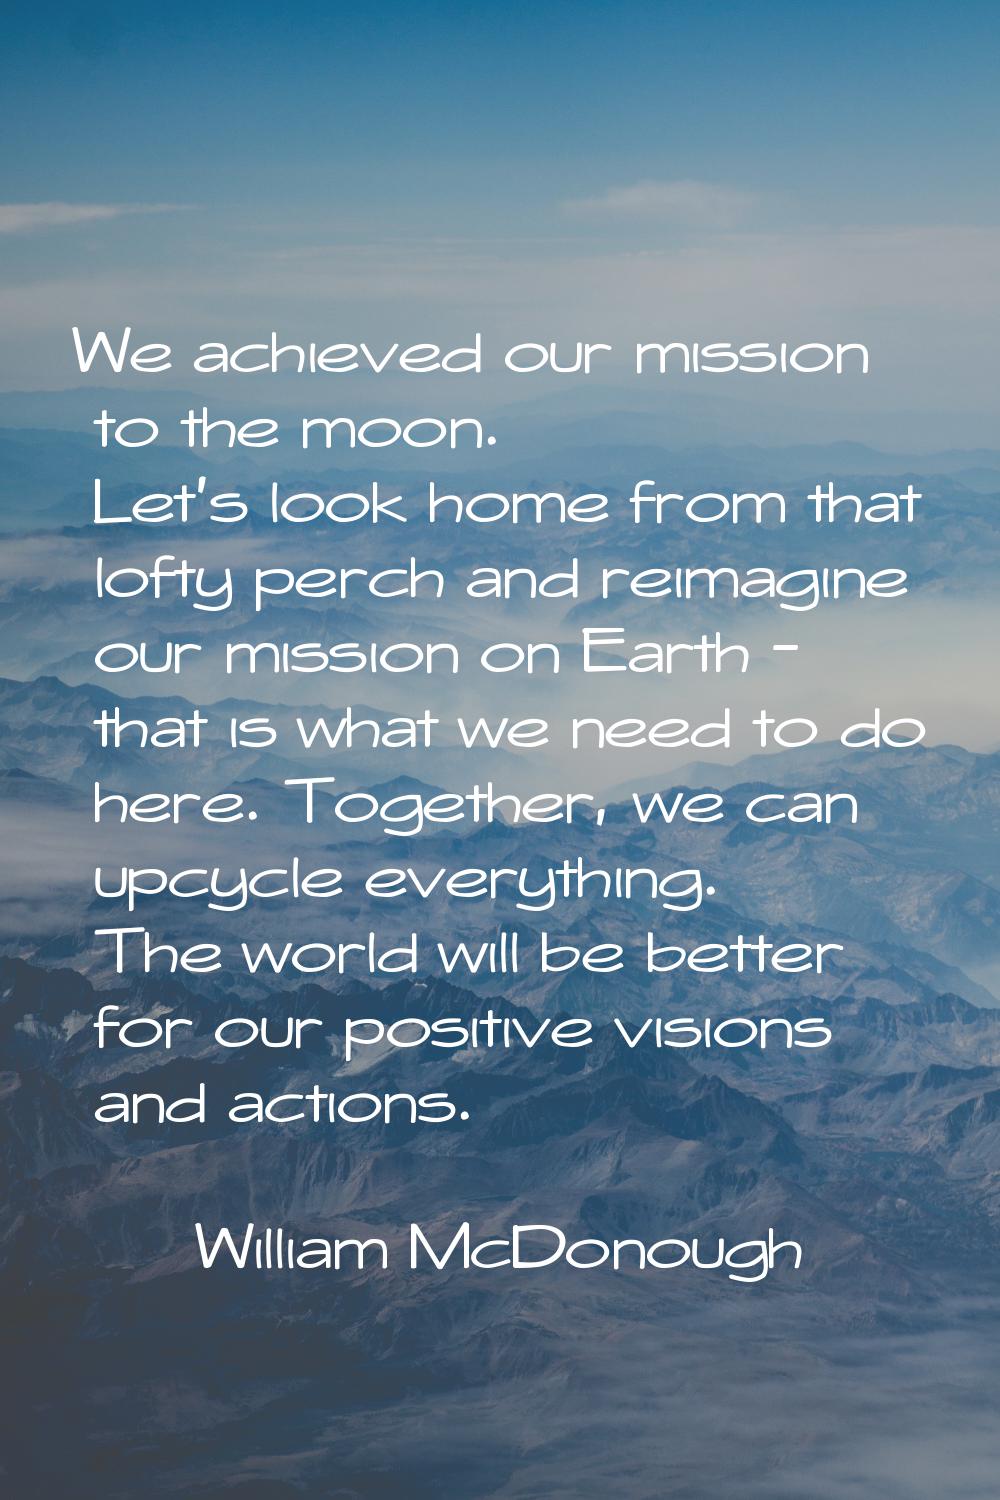 We achieved our mission to the moon. Let's look home from that lofty perch and reimagine our missio